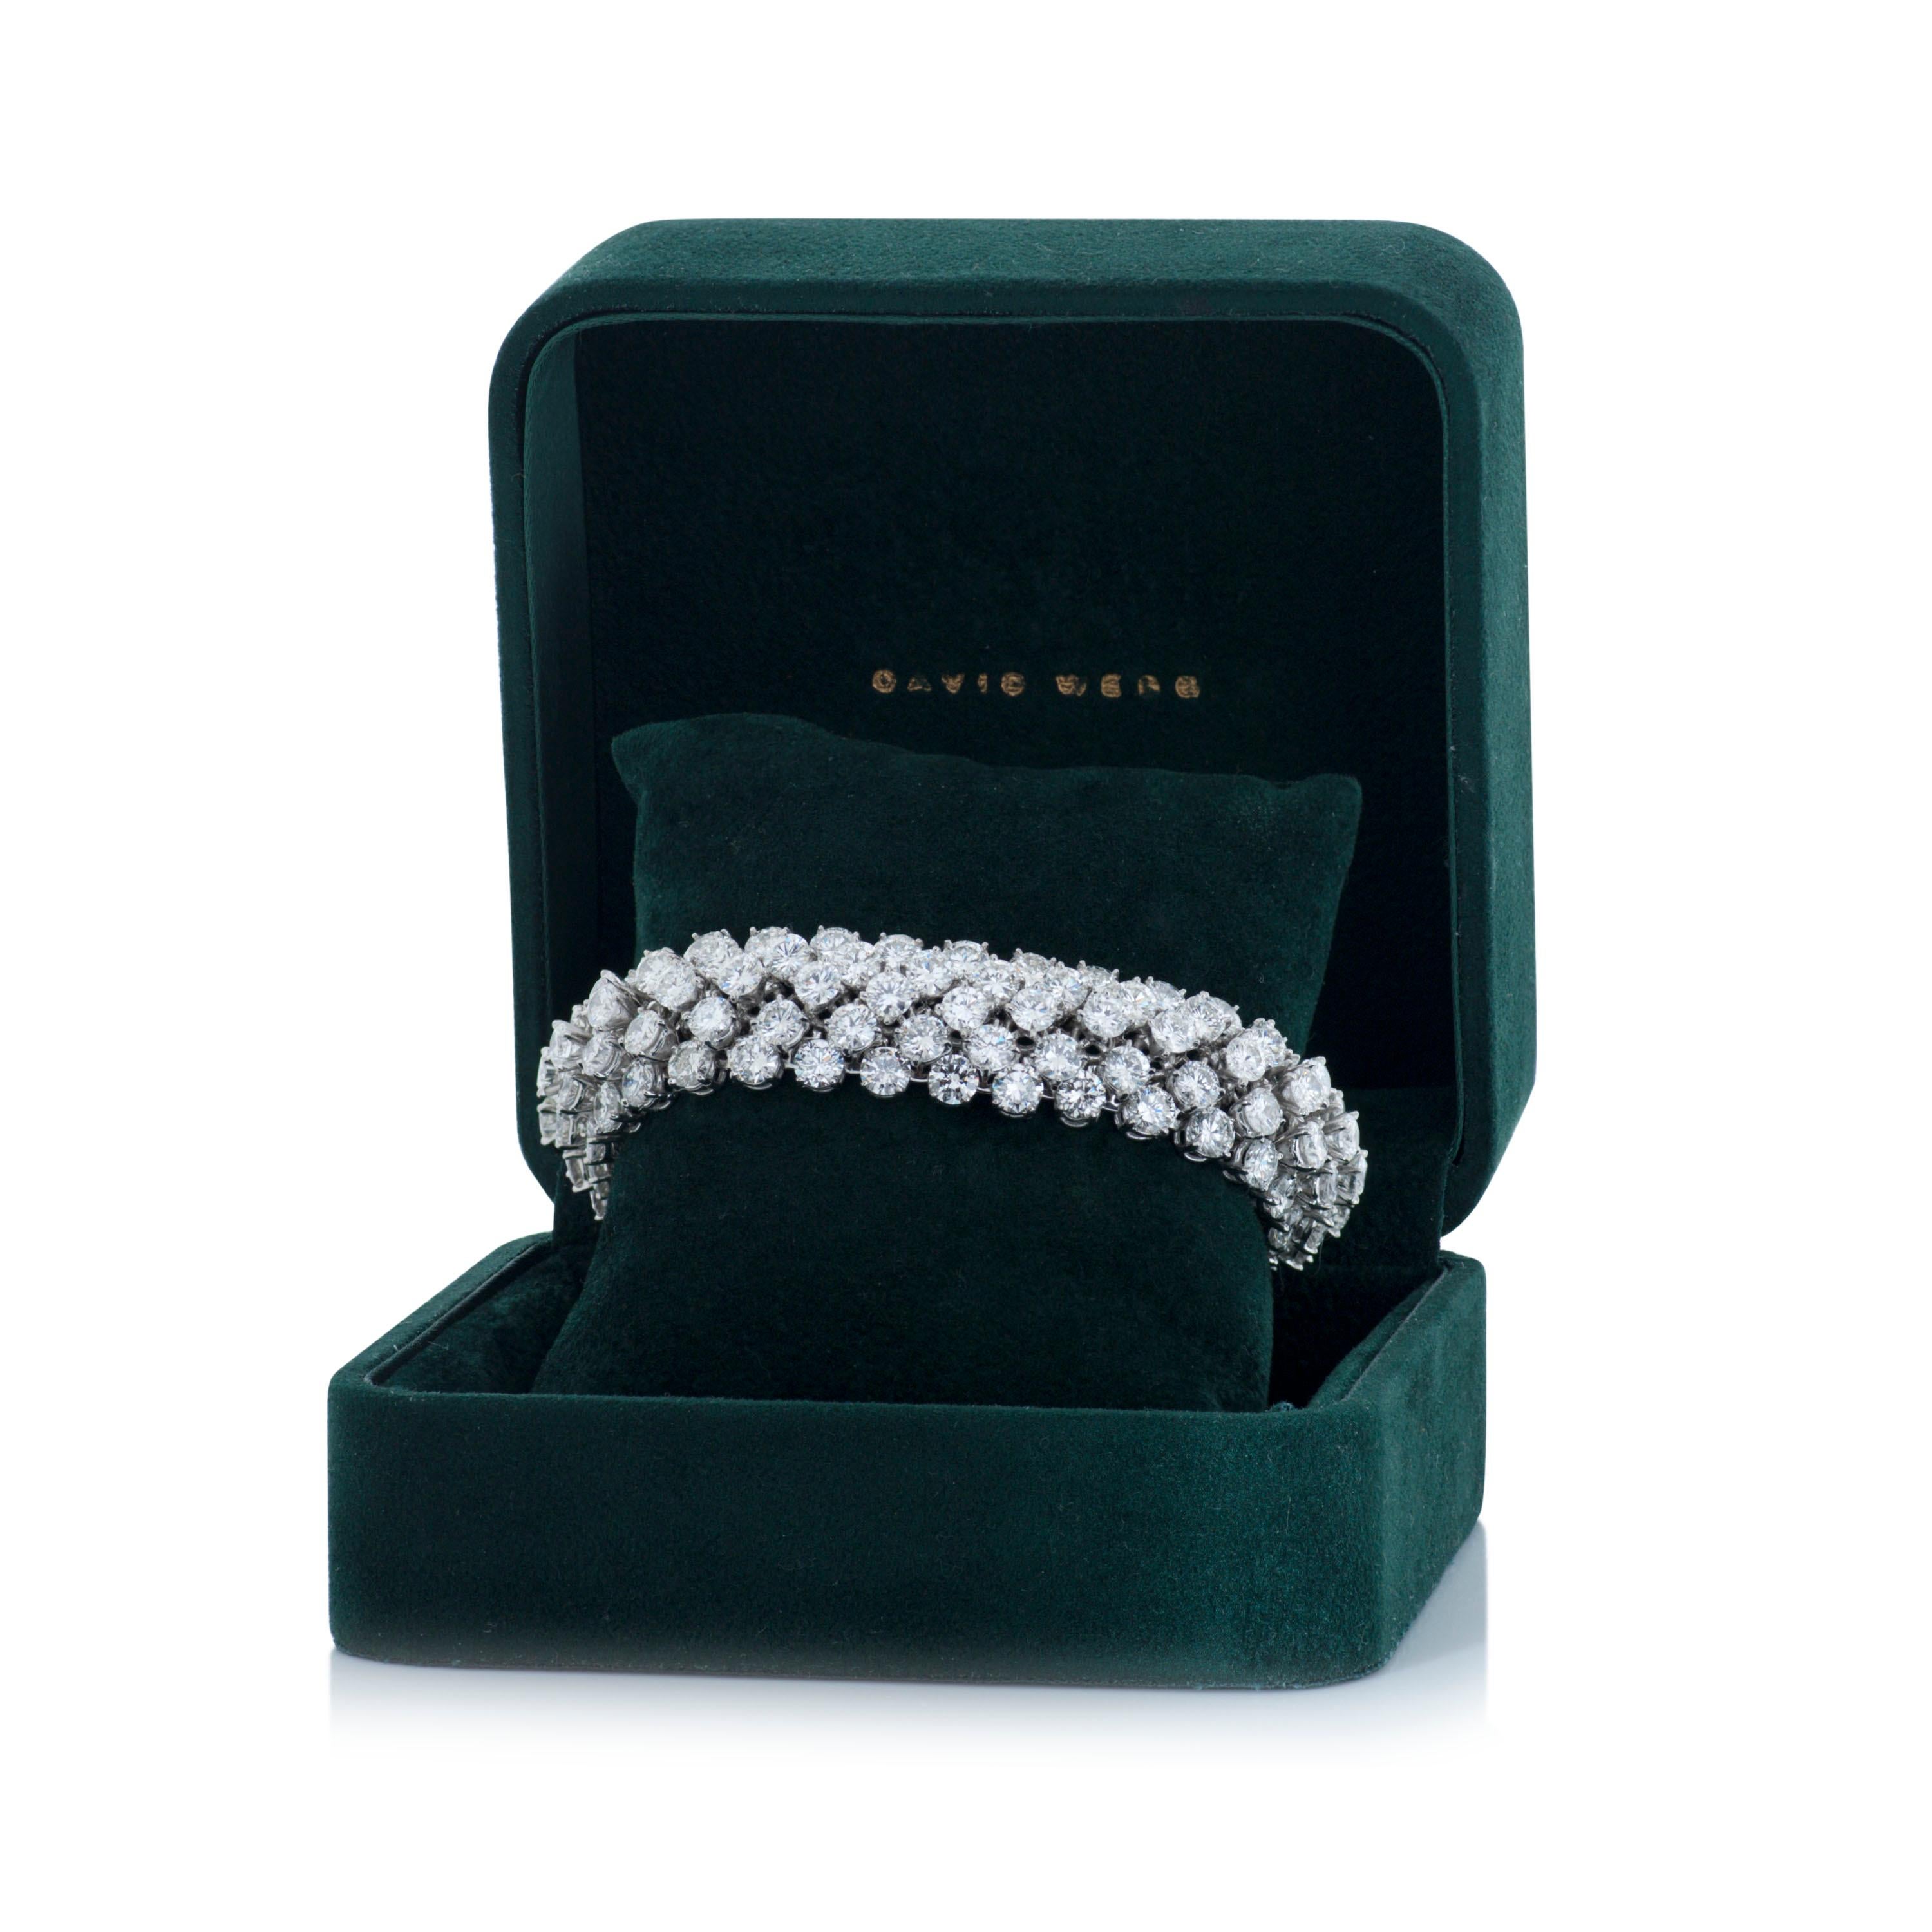 David Webb flexible platinum 5 row diamond bracelet accompanied by a David Webb box and David Webb certificate of authenticity.

This David Webb bracelet features five rows of round brilliant cut diamonds totaling approximately 52.00 carats set in